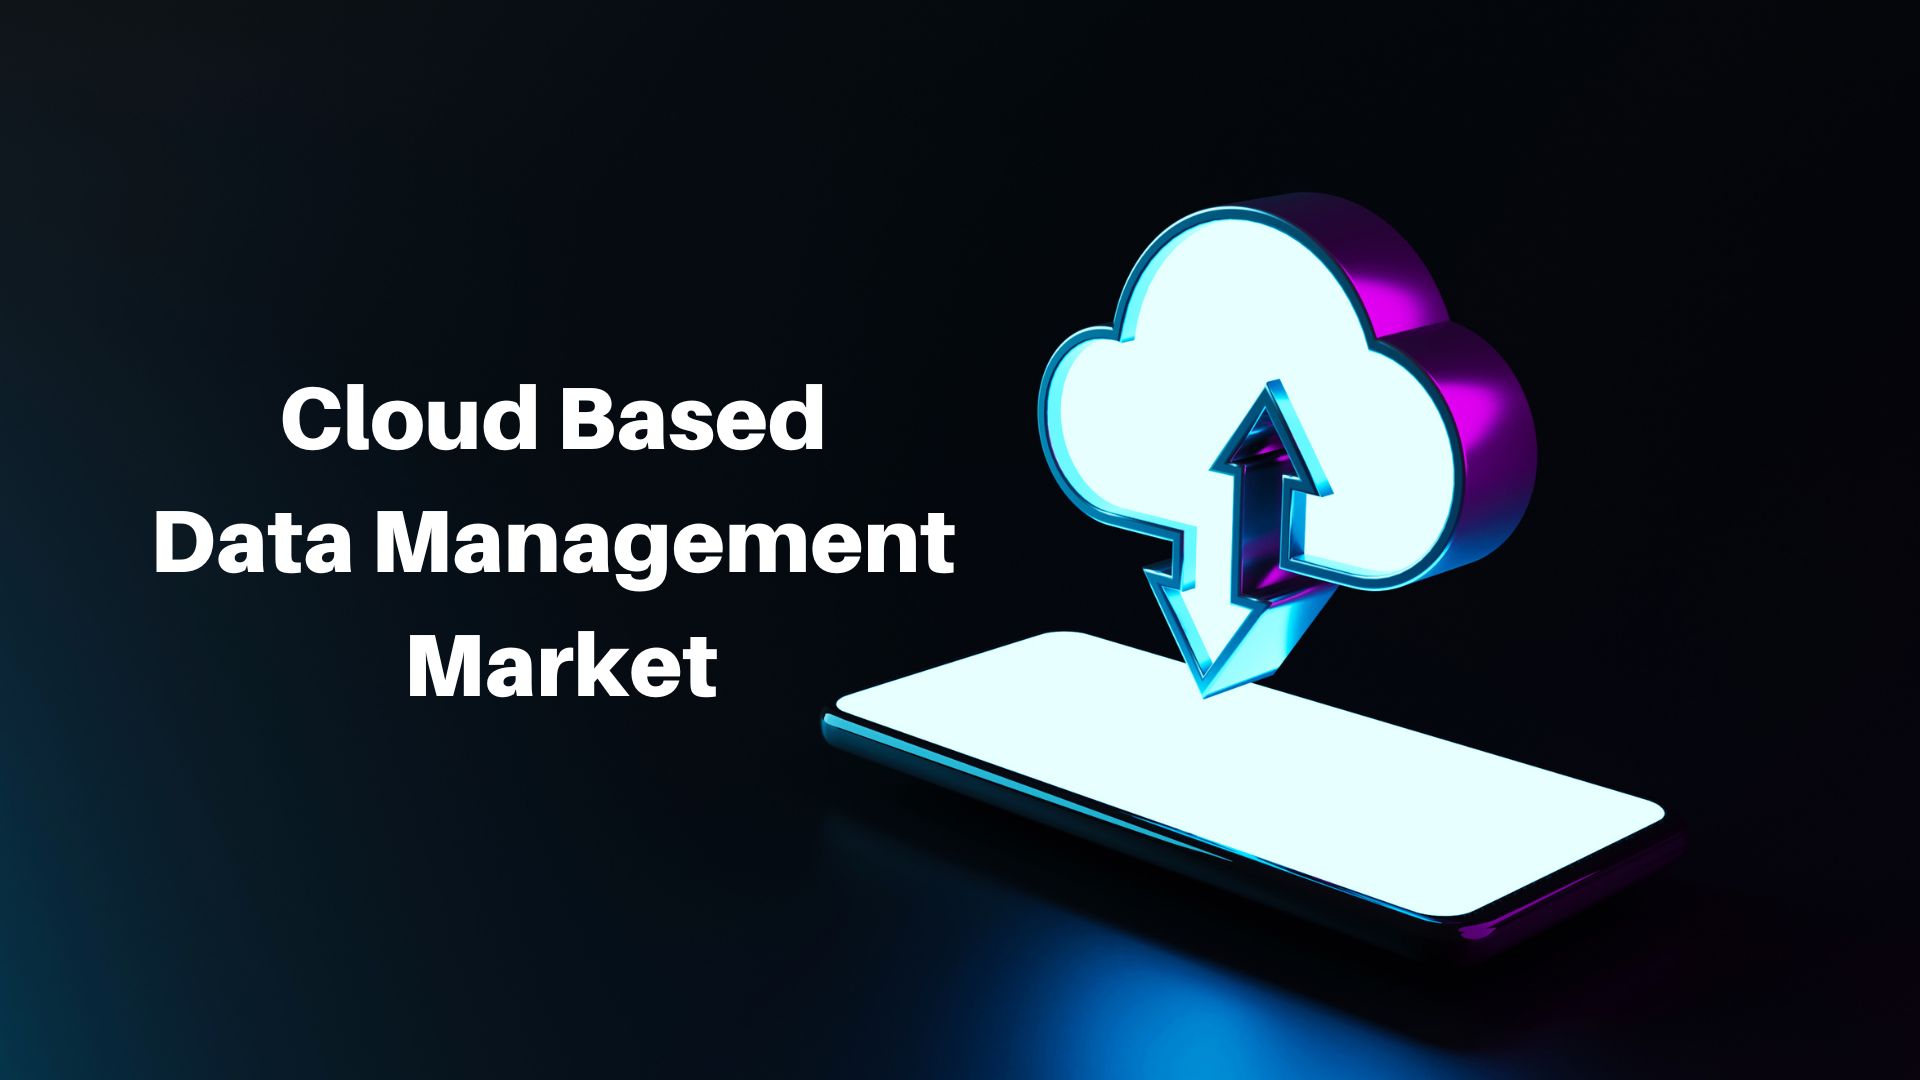 Cloud Based Data Management Services Market Size is expected to reach USD 776.7 Bn by 2033